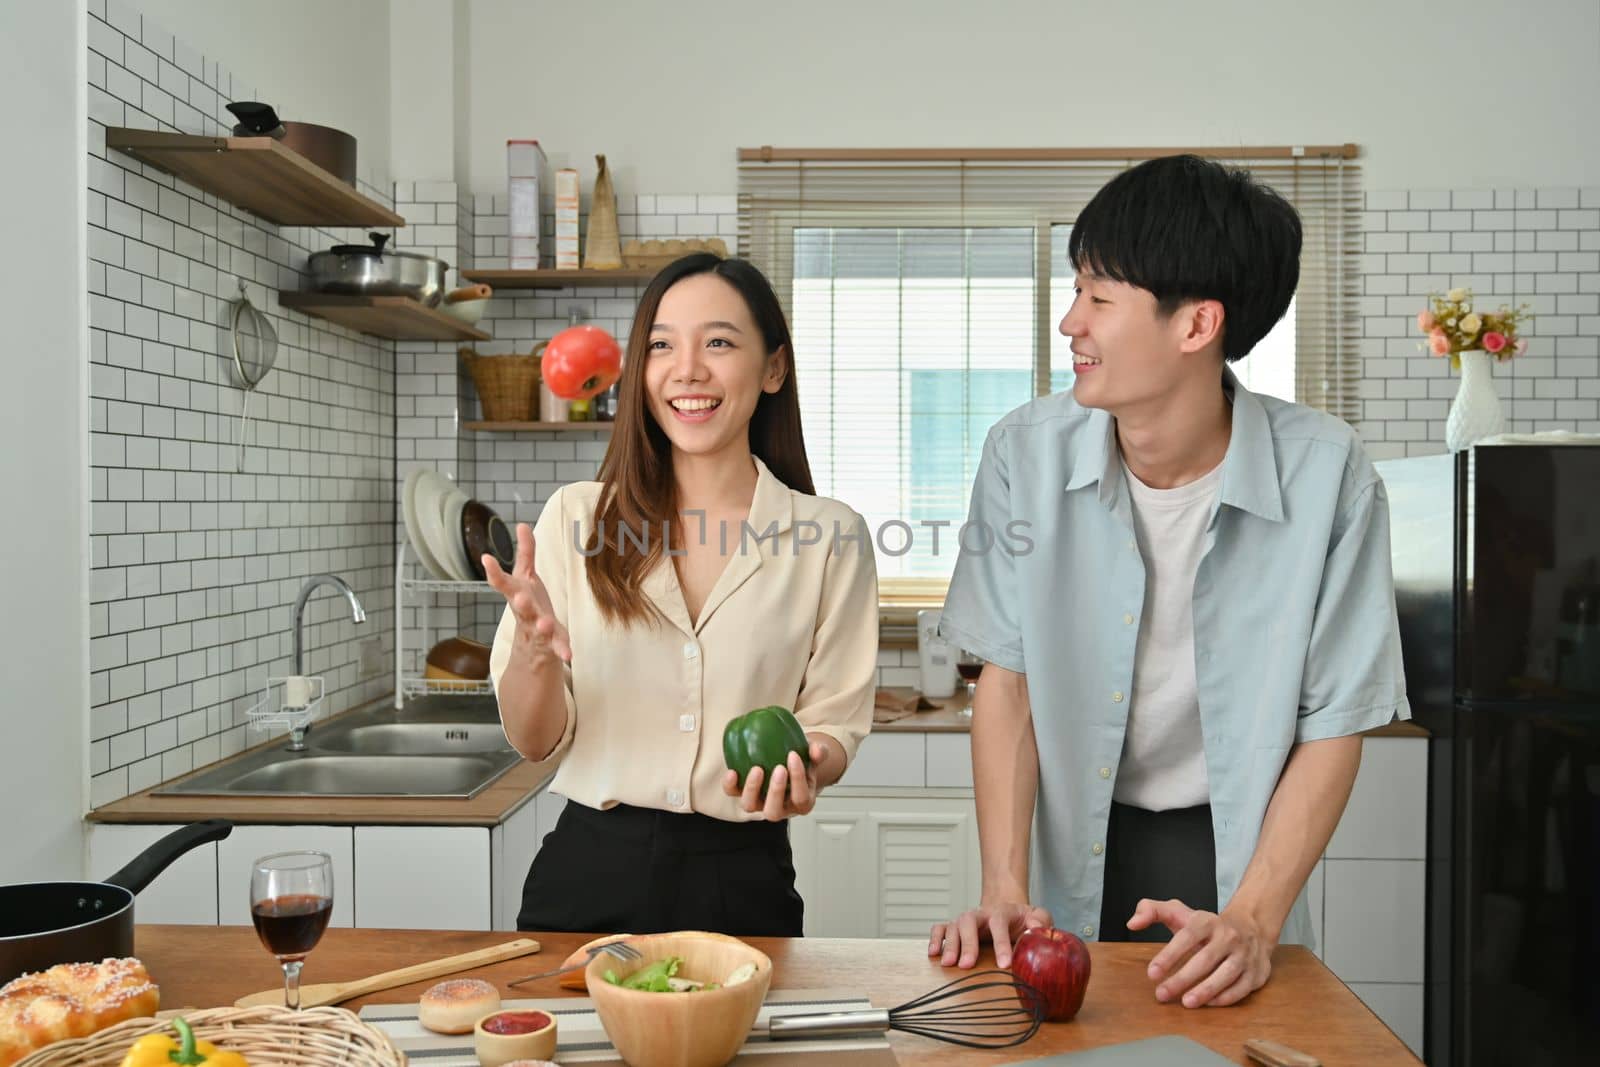 Adorable young couple enjoying spending time together while cooking in modern kitchen by prathanchorruangsak